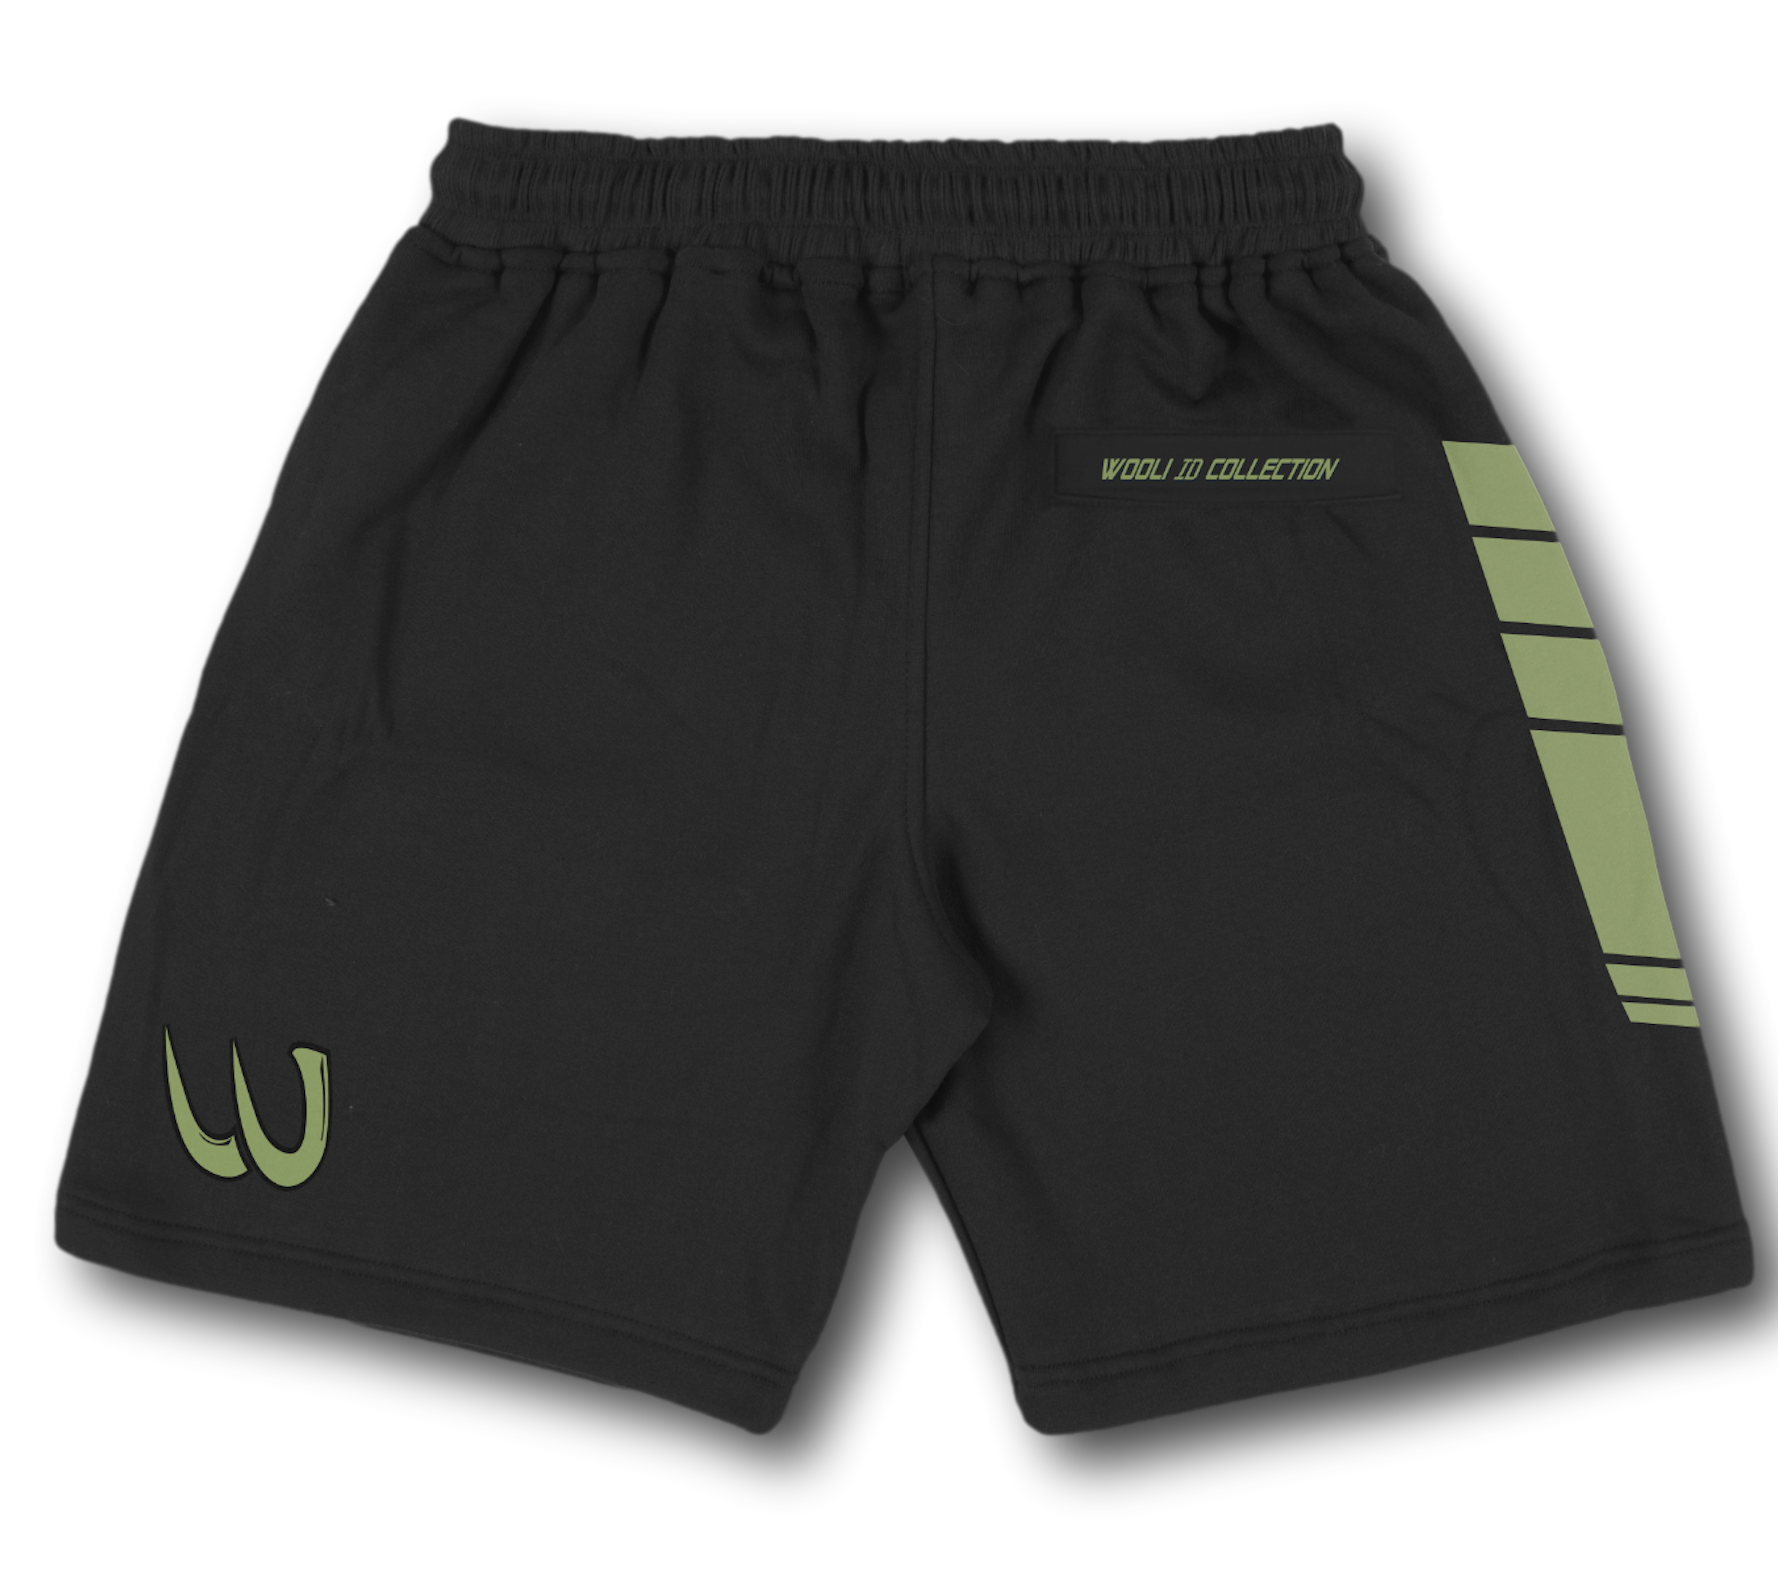 WOOLI ID COLLECTION SHORTS (PRE ORDER)